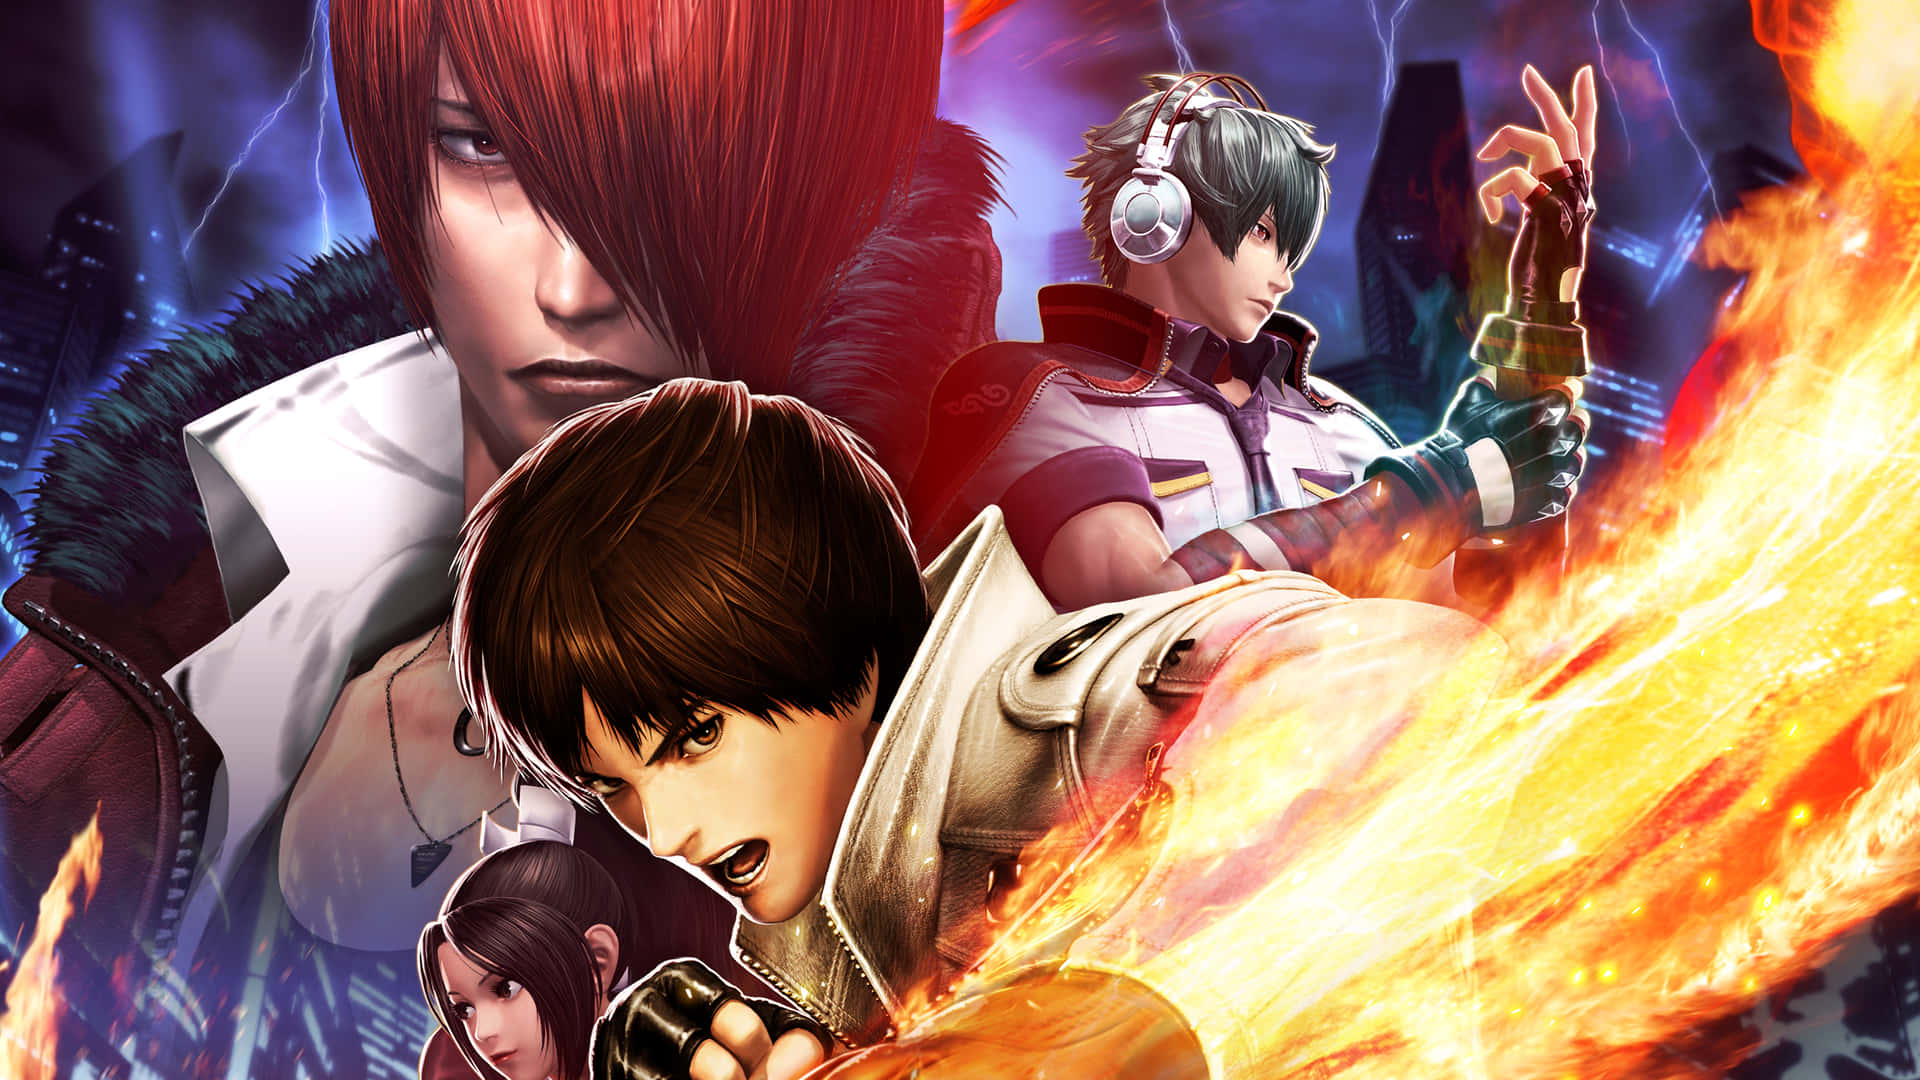 King Of Fighters Xiii - Pc Game Wallpaper